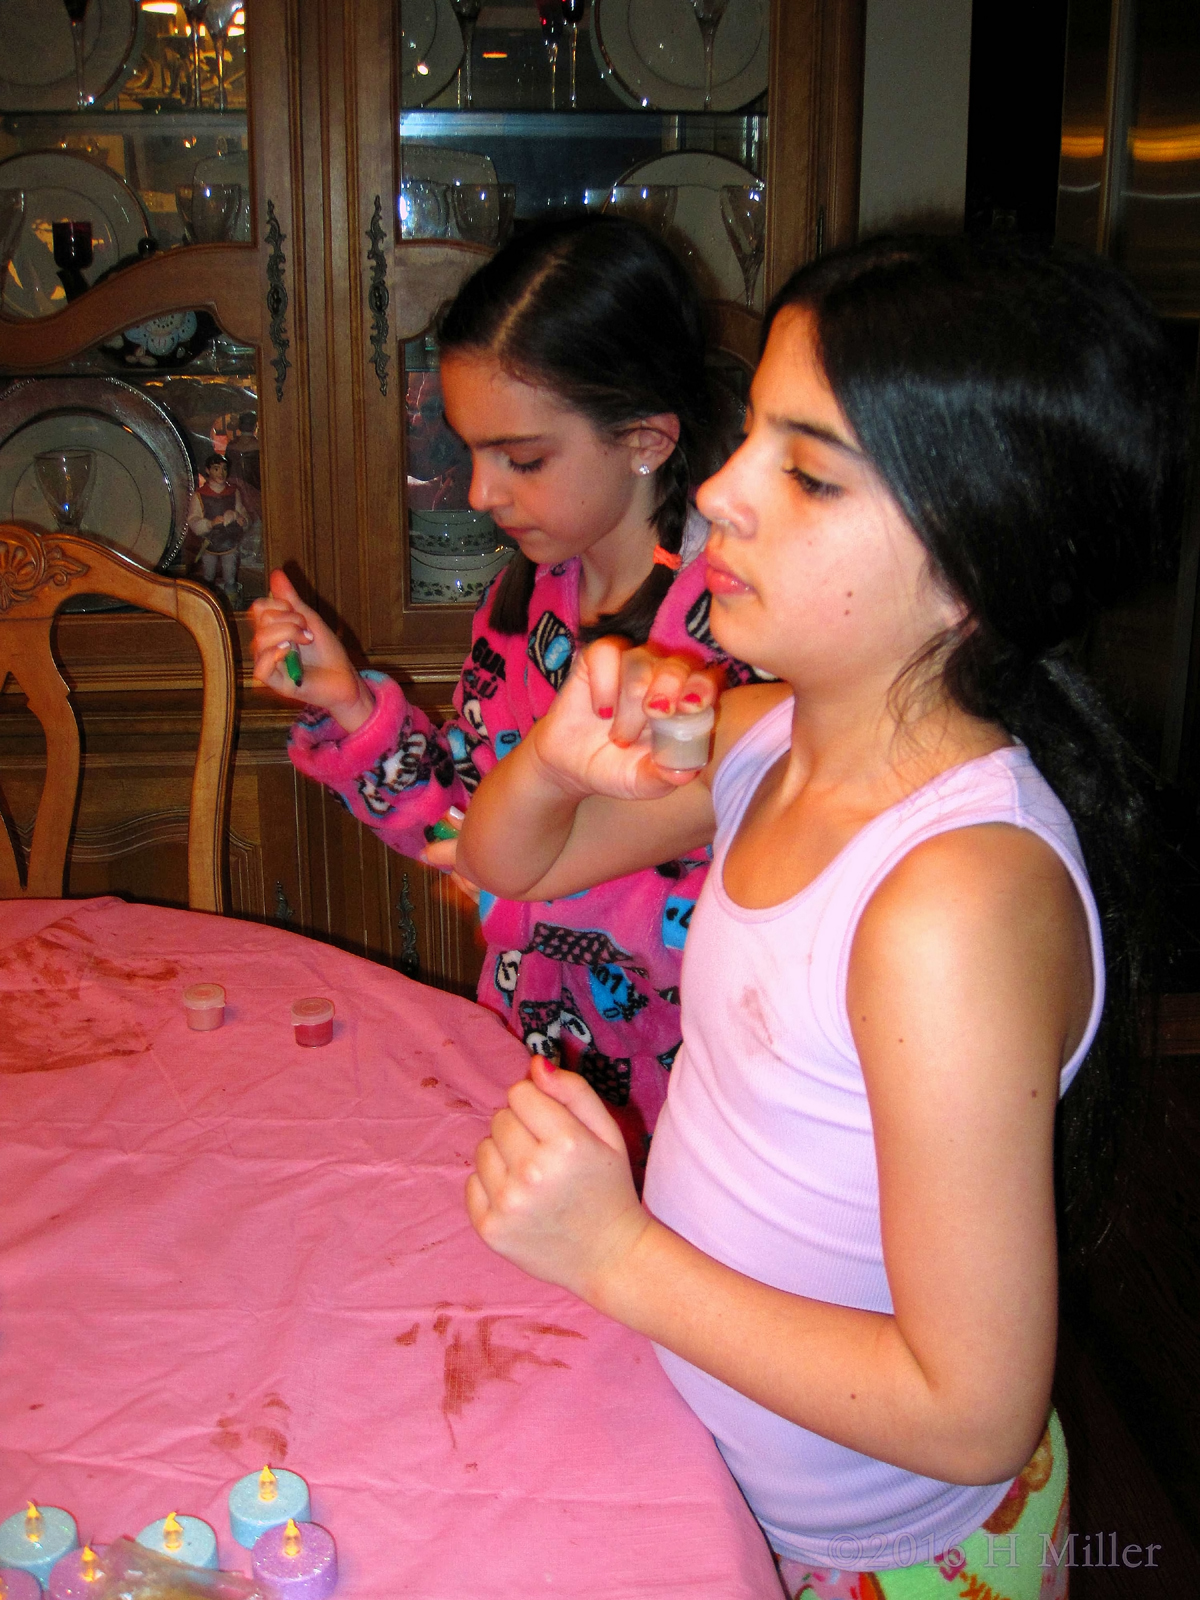 Brooke And Her Friend Busy With The Kids Crafts Activity! 